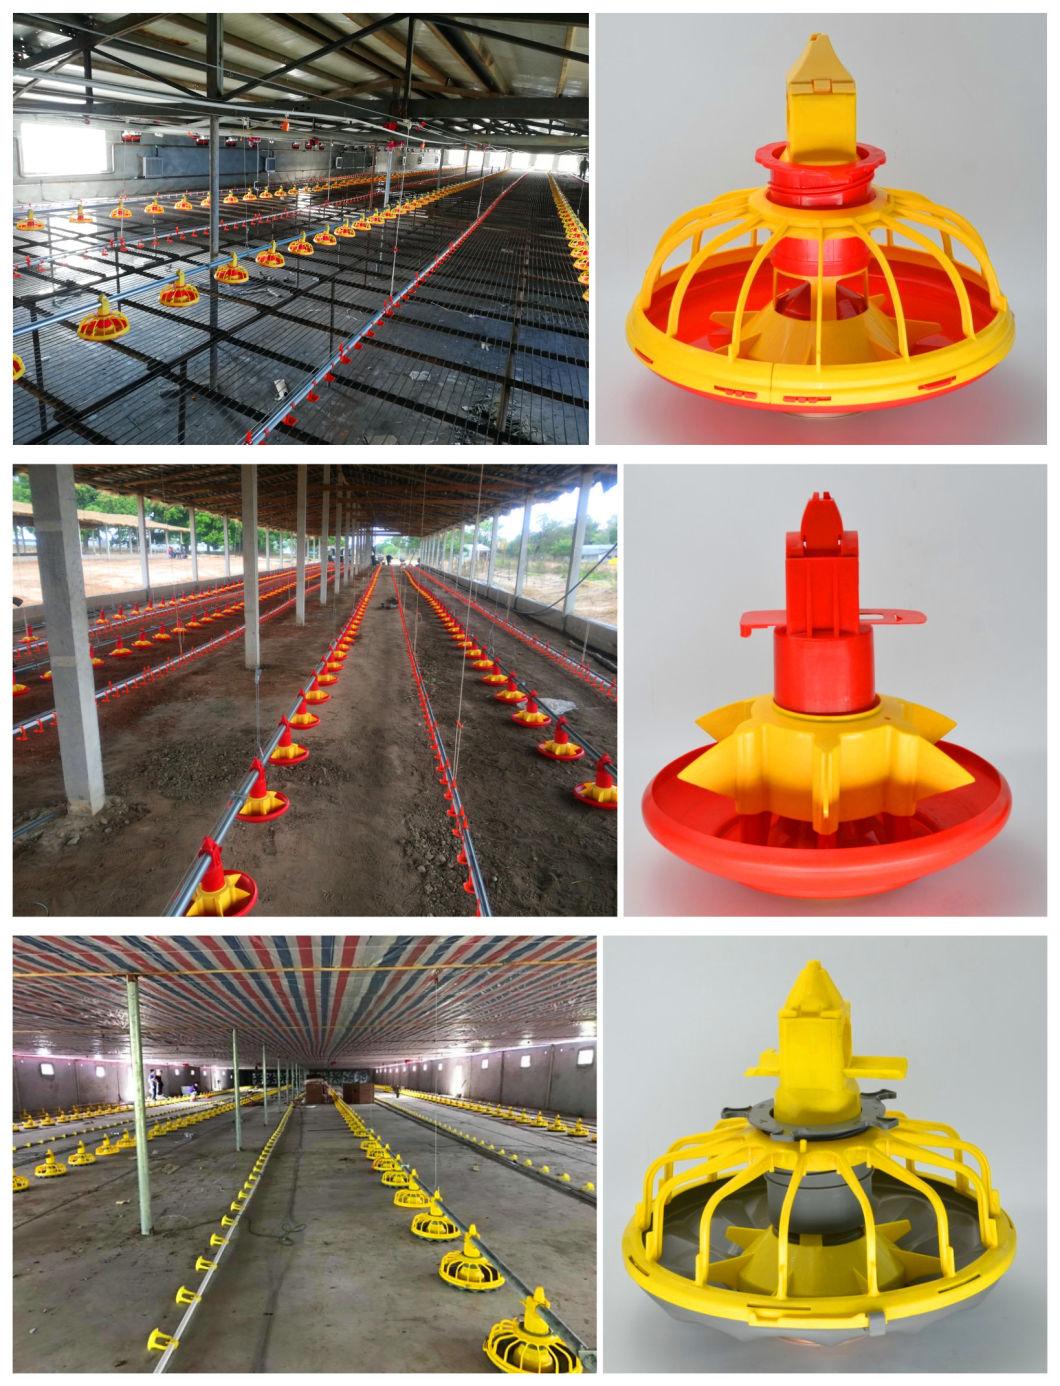 Low Price Automatic Chicken Poultry Farm Equipment for Sale in Nigeria